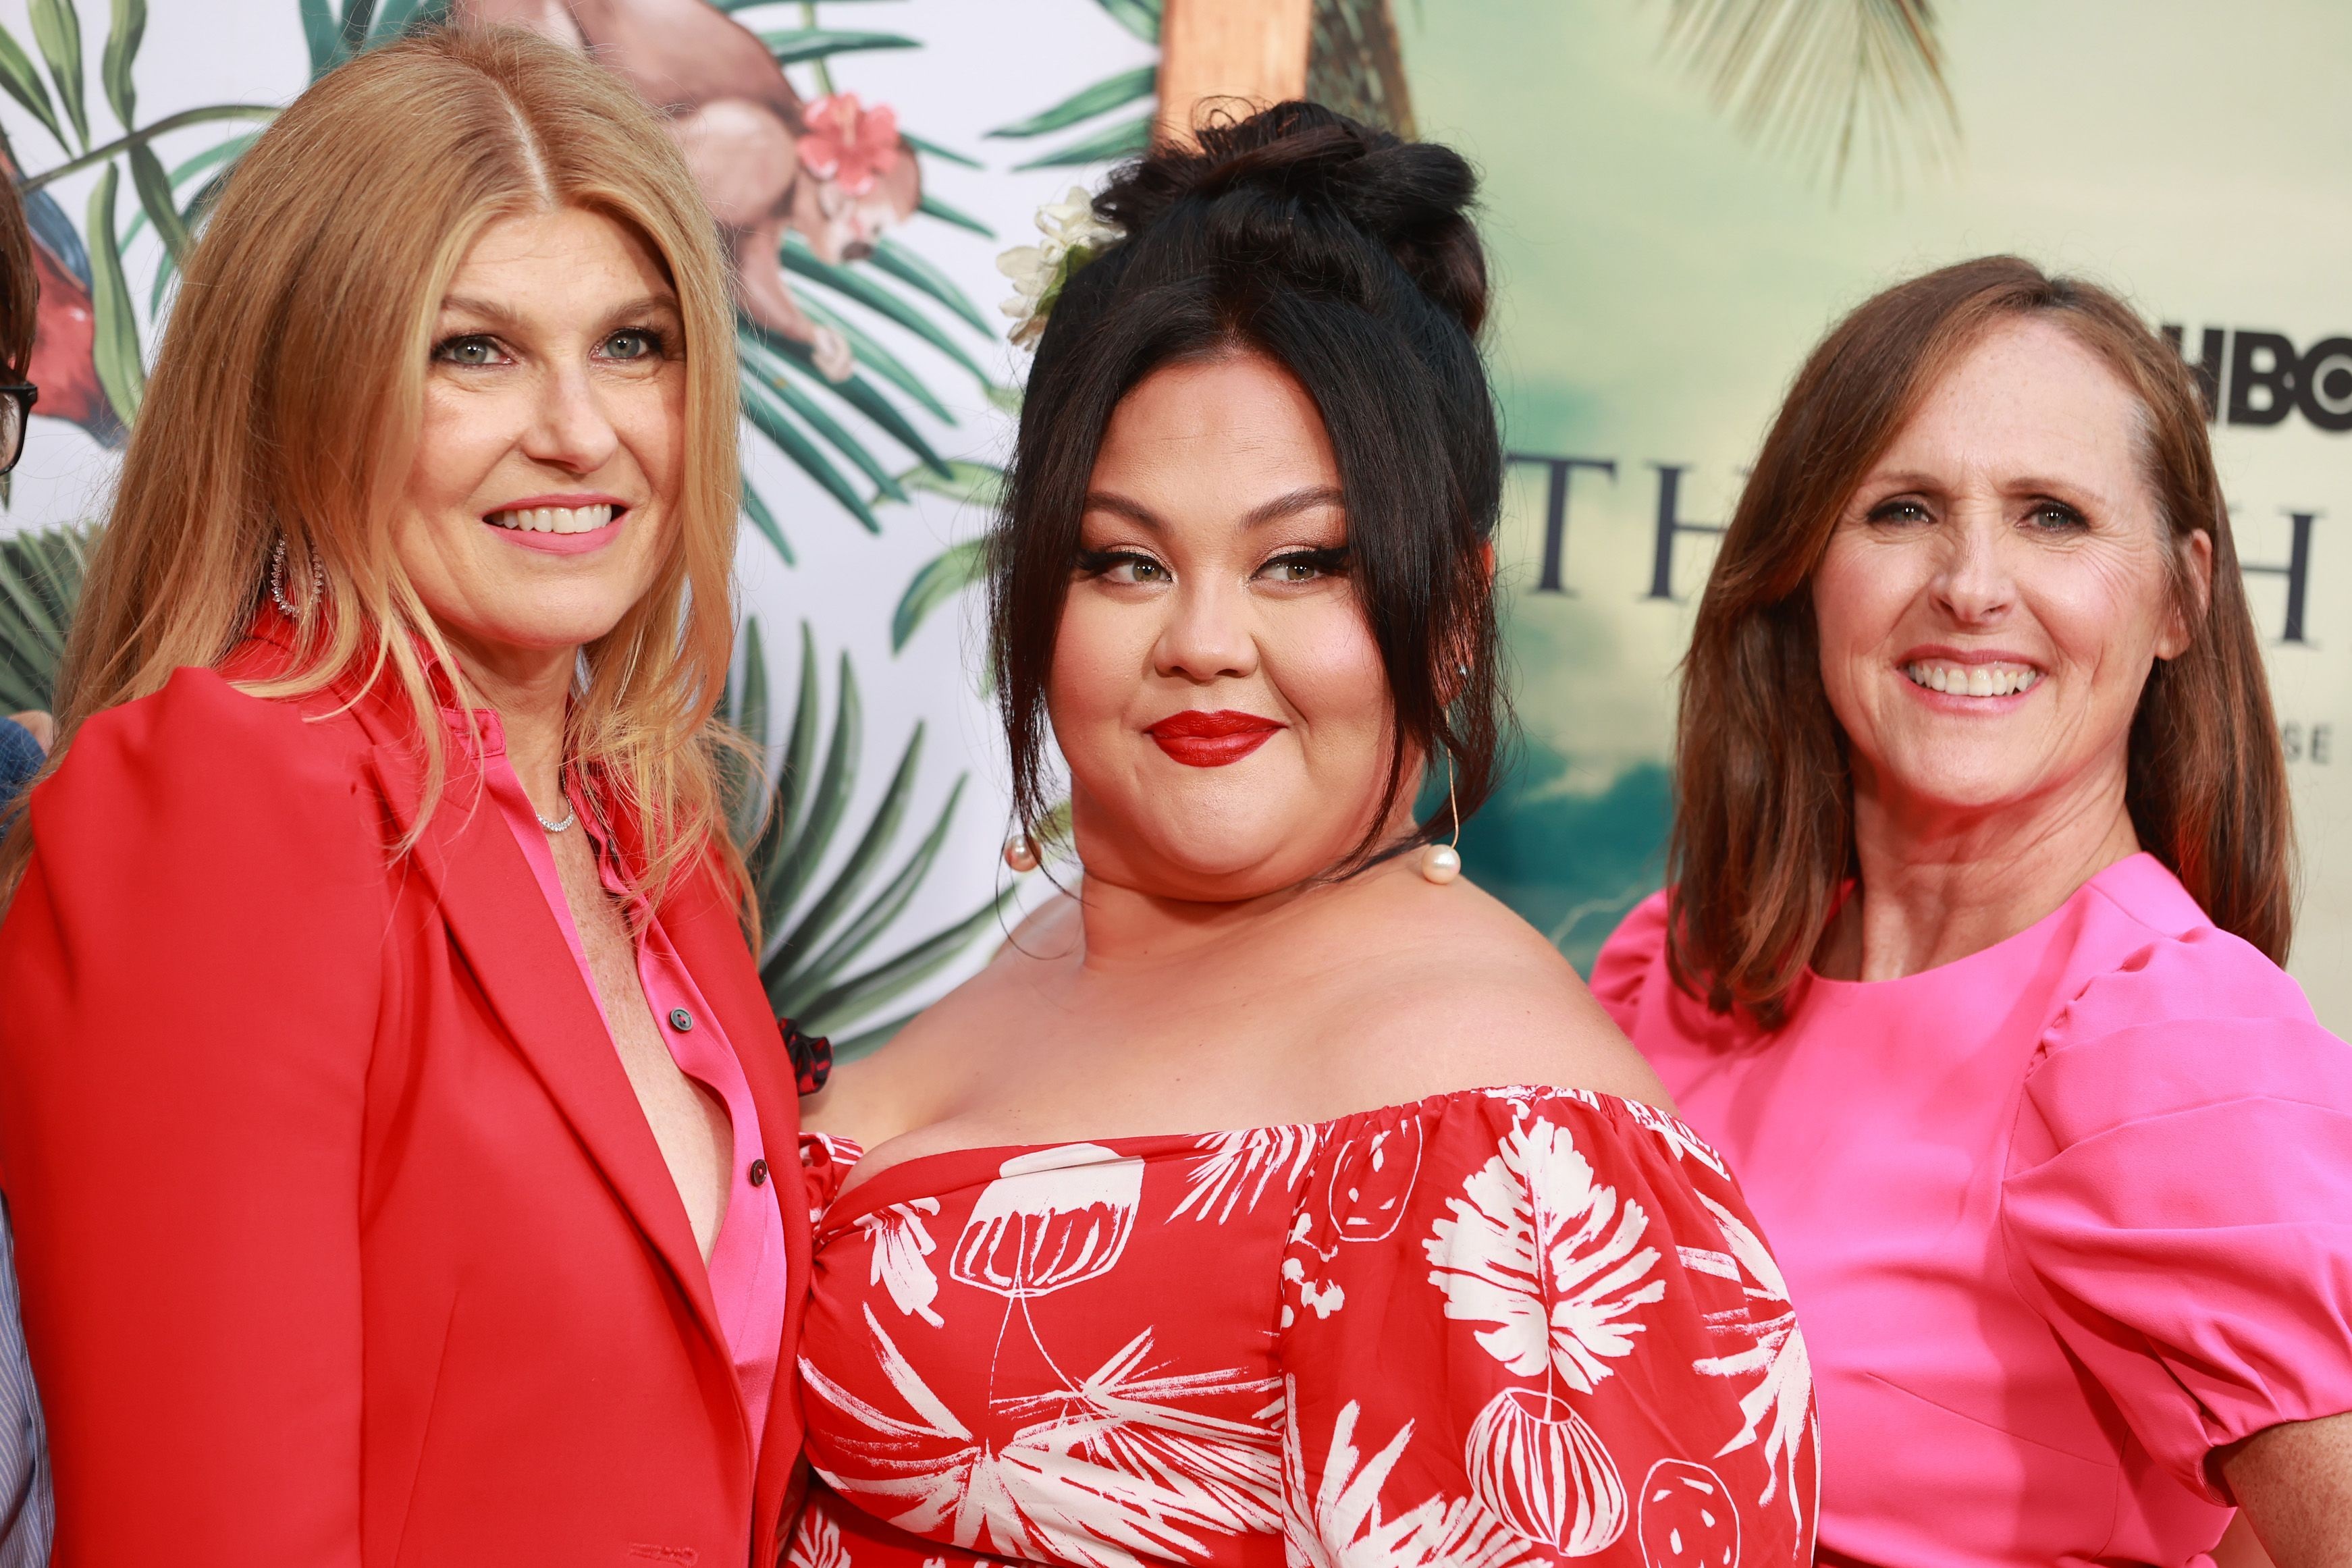 'The White Lotus' stars Connie Britton, Jolene Purdy and Molly Shannon posing for photographers at the Los Angeles Premiere